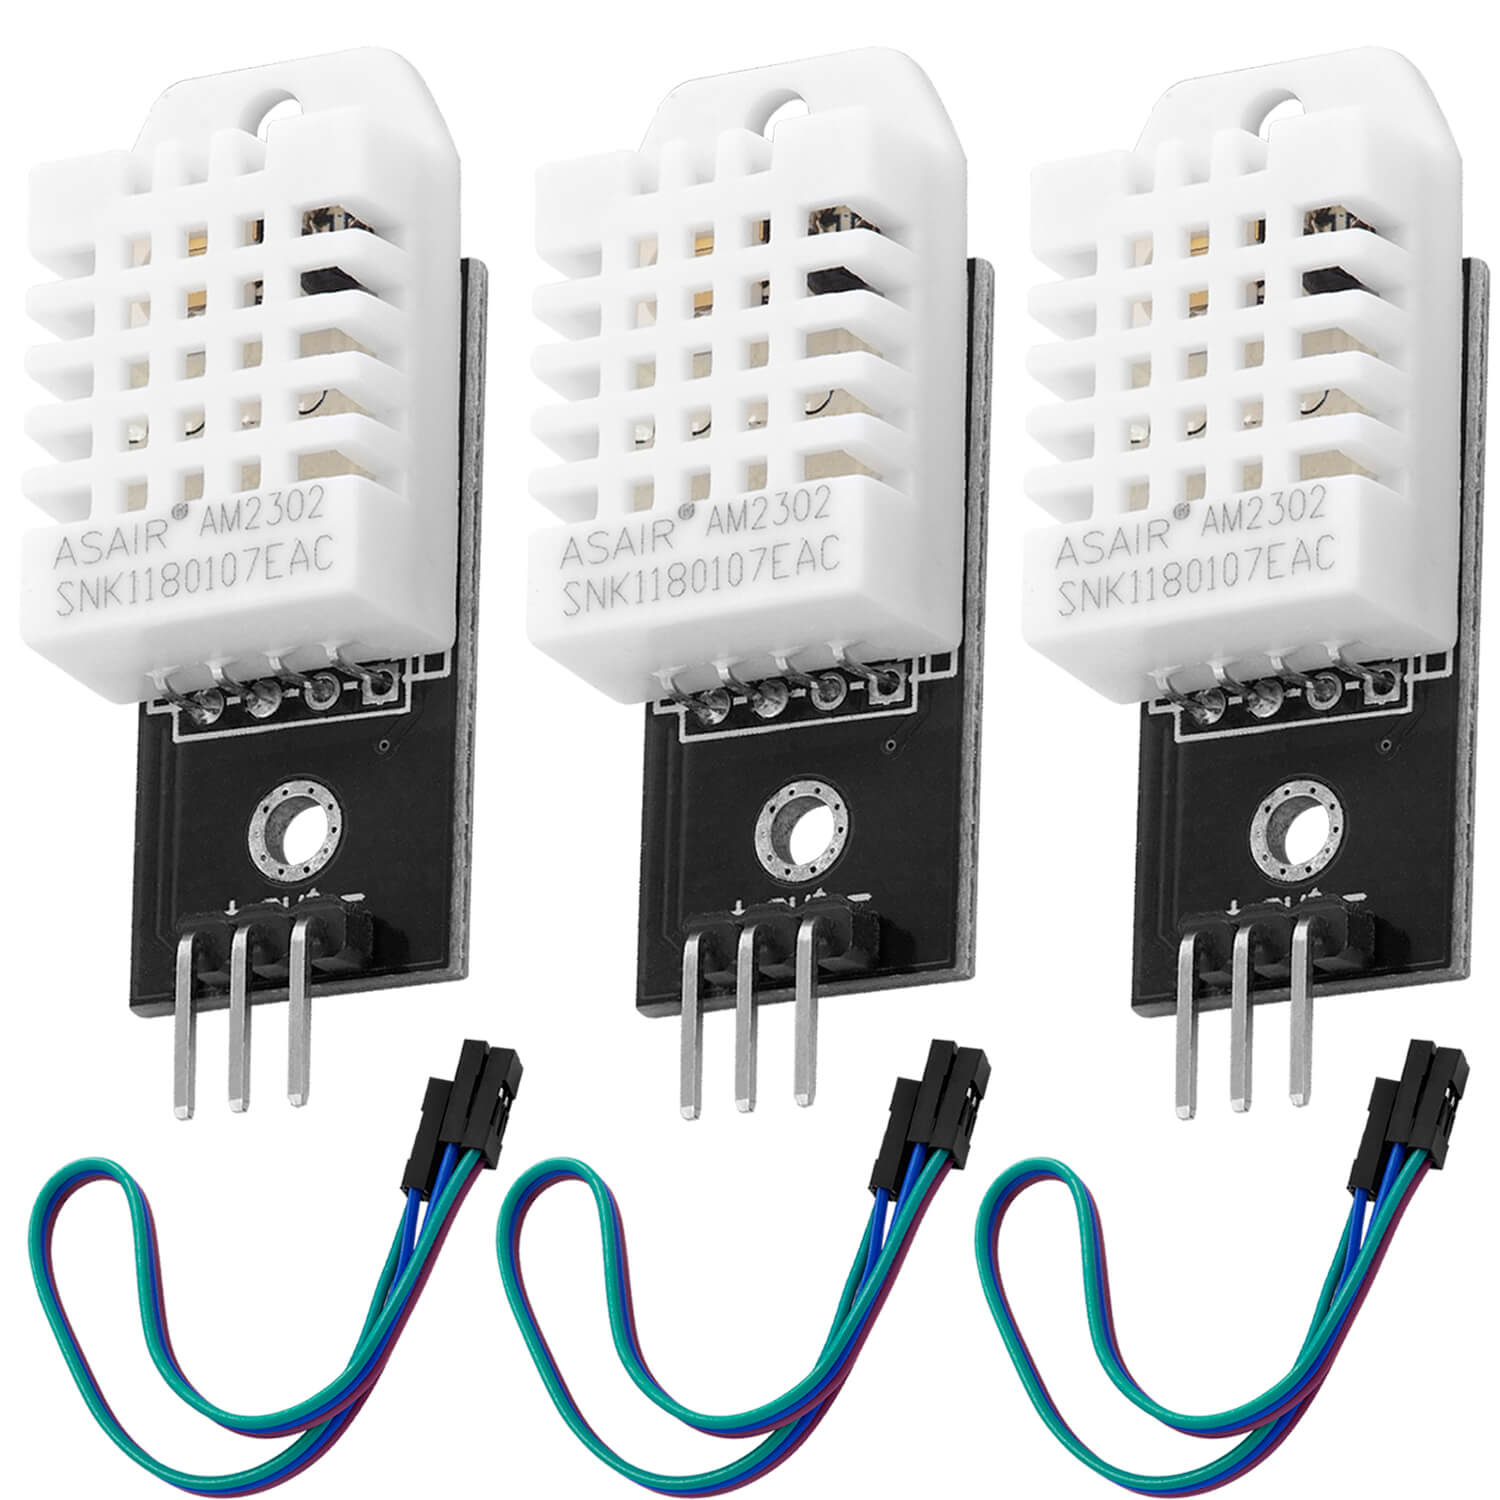 DHT22 AM2302 Temperature sensor and air humidity sensor with a circuit  board and cable compatible with Arduino and Raspberry Pi